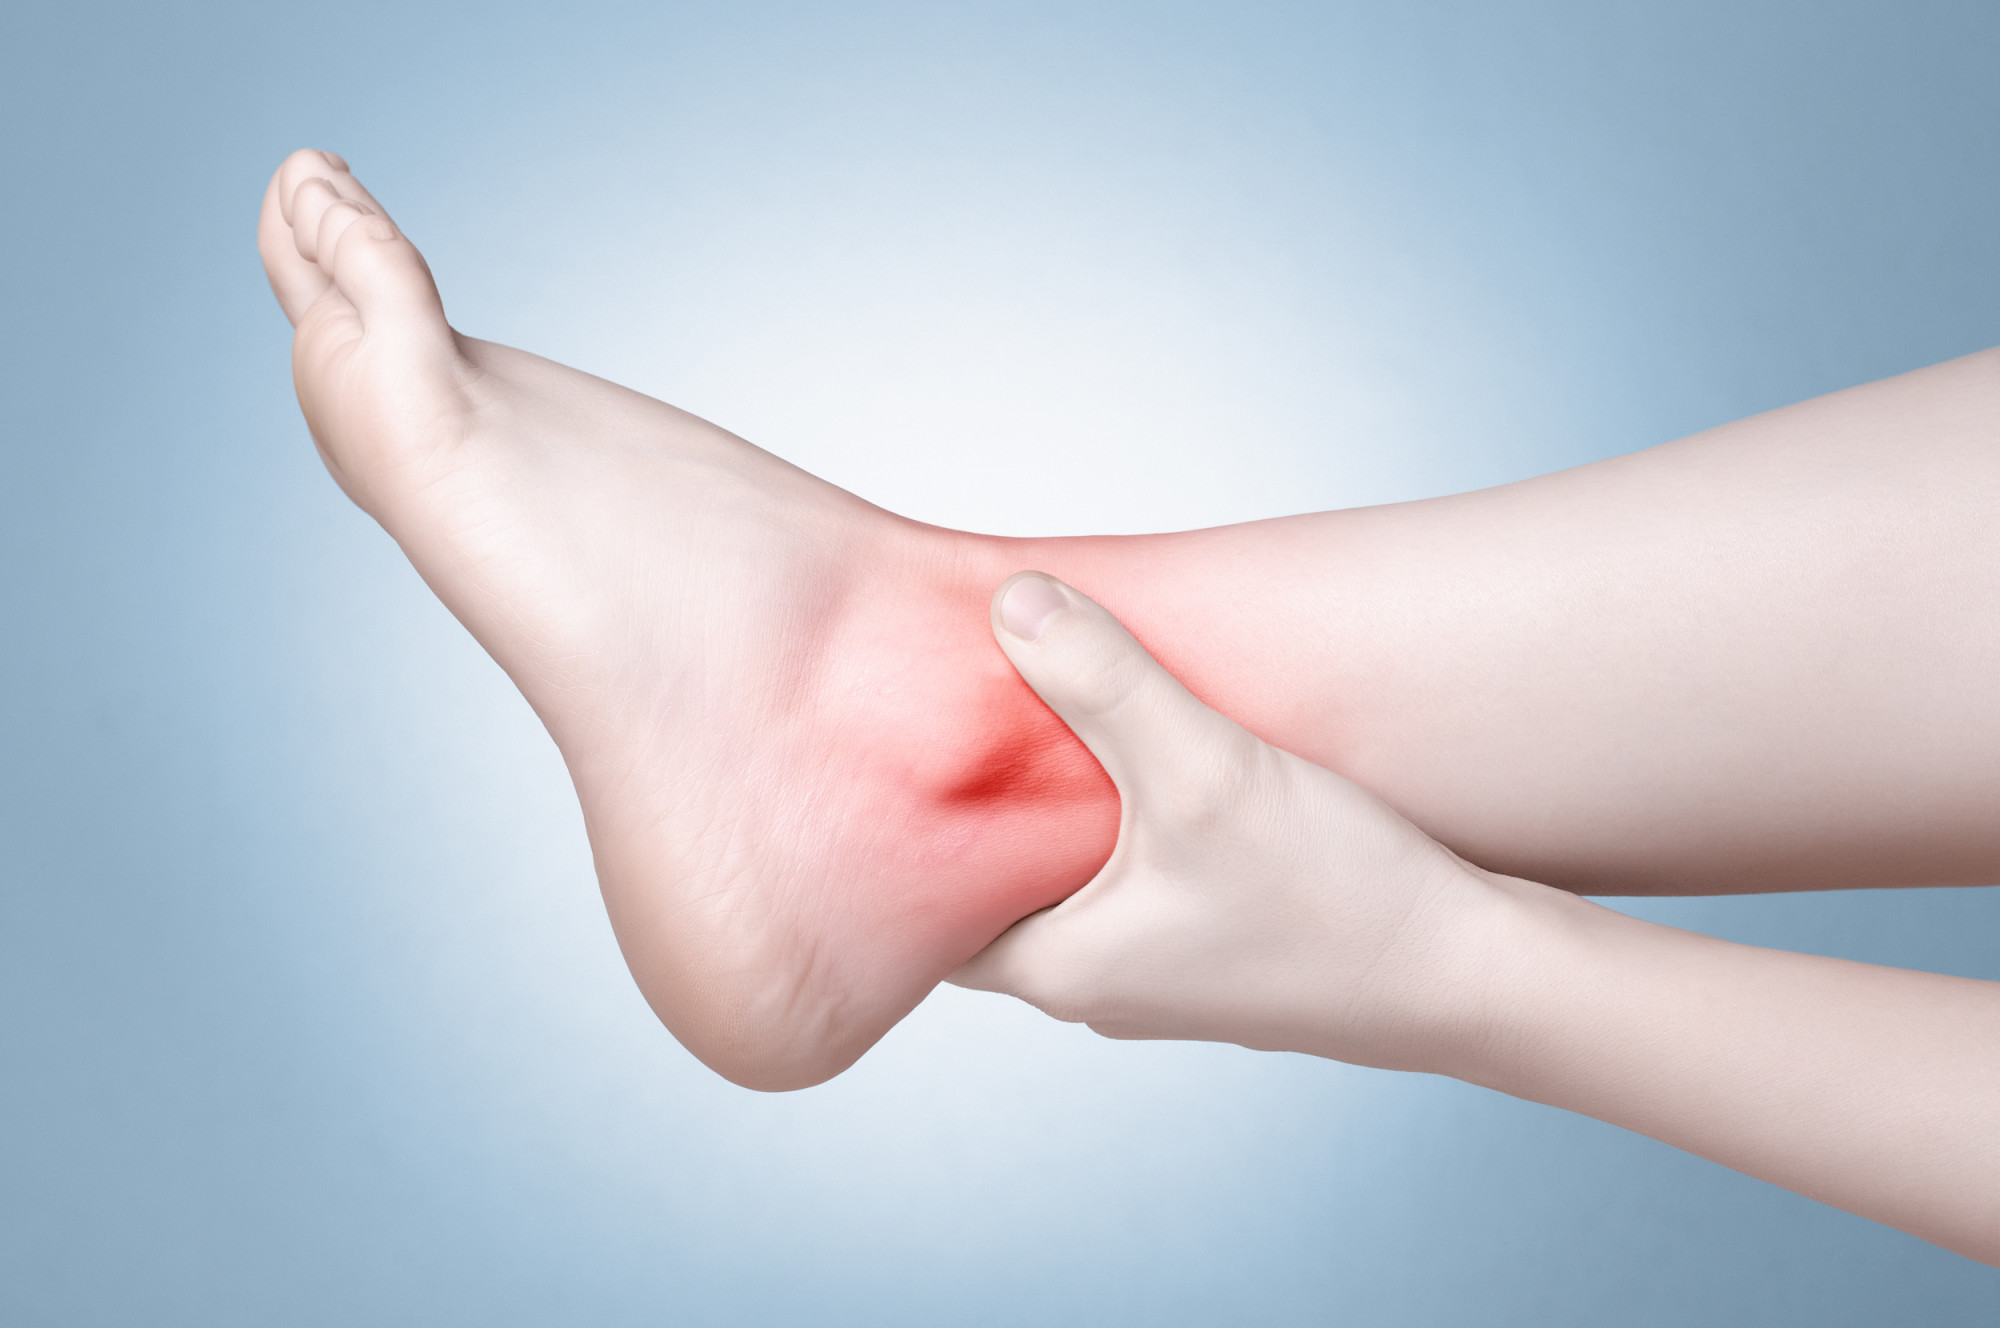 How to Find an Ankle Surgeon for a Personal Injury Case